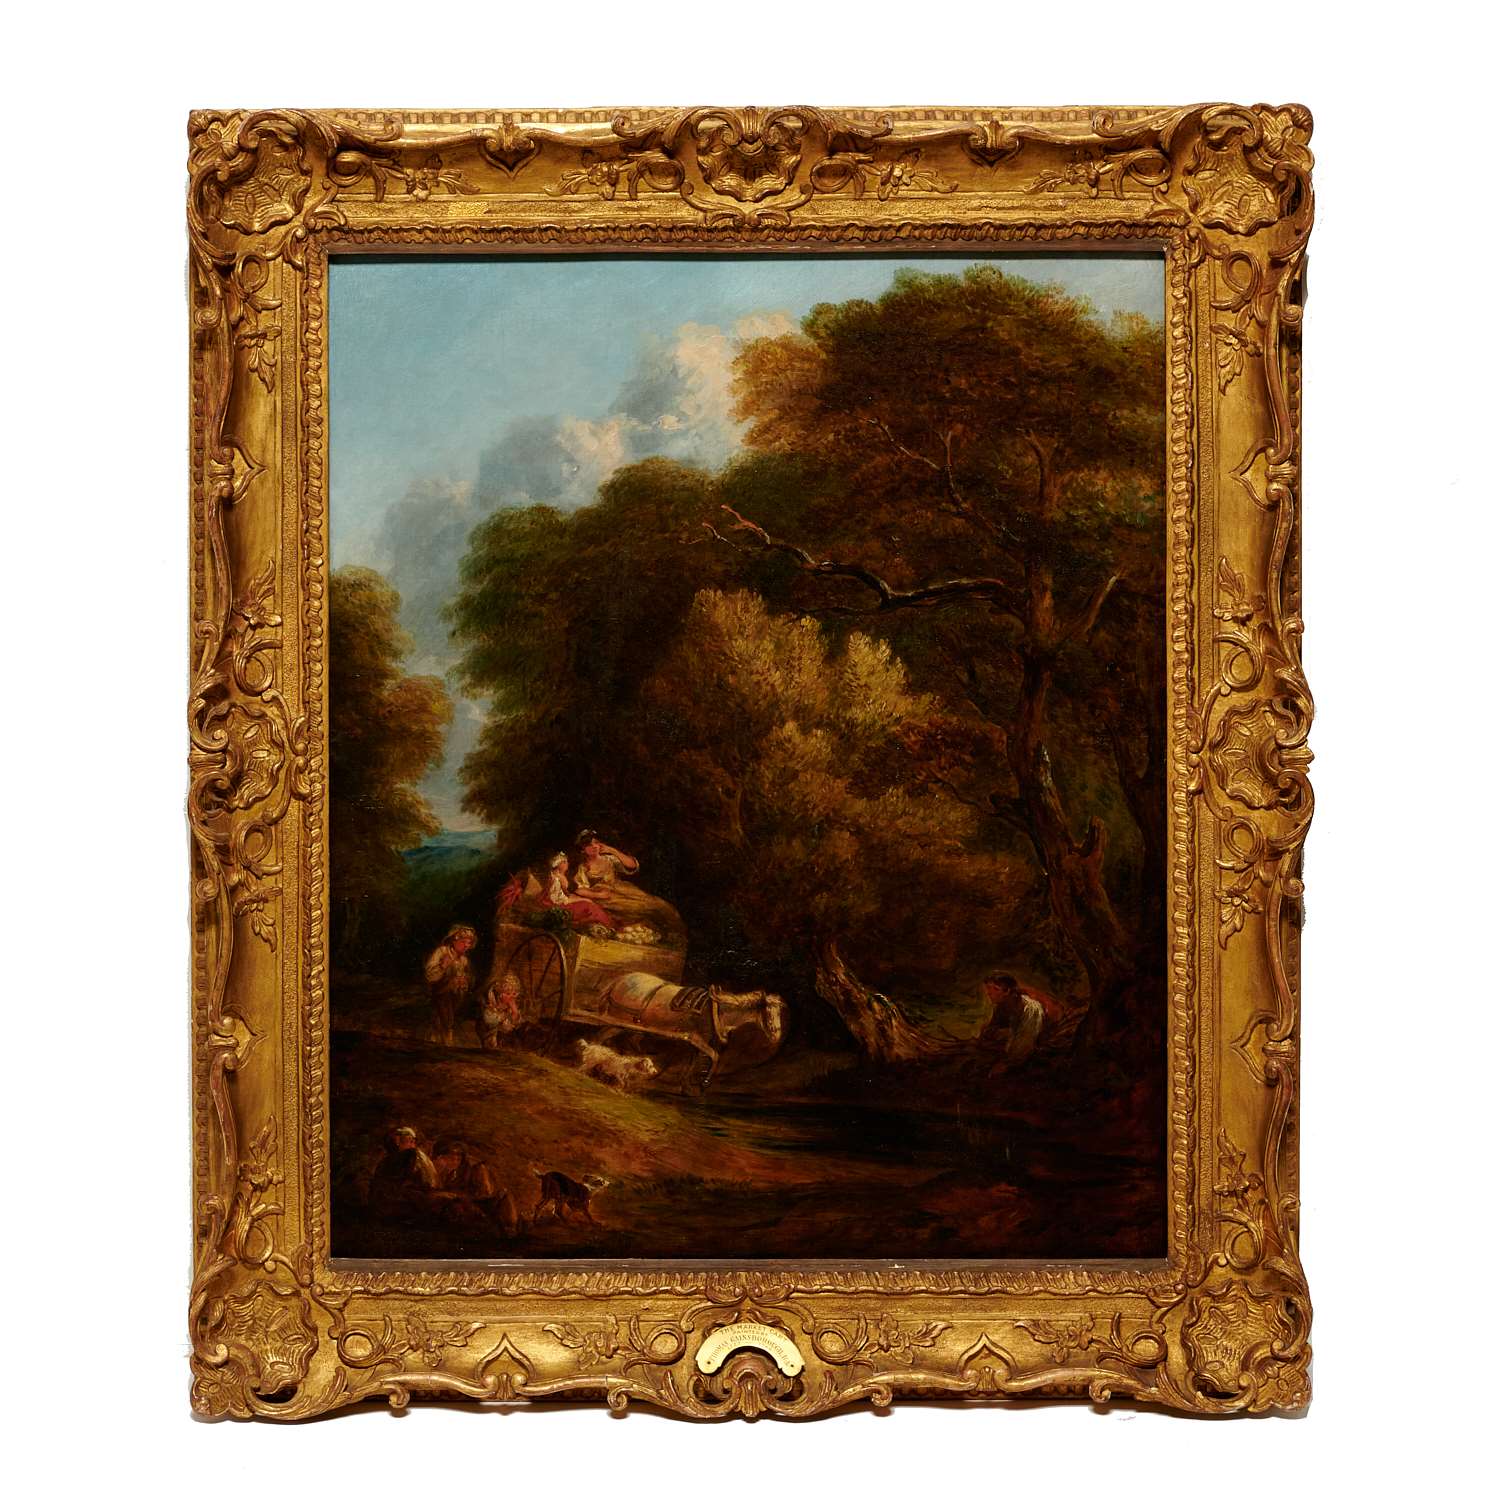 THOMAS GAINSBOROUGH (AFTER), OIL ON